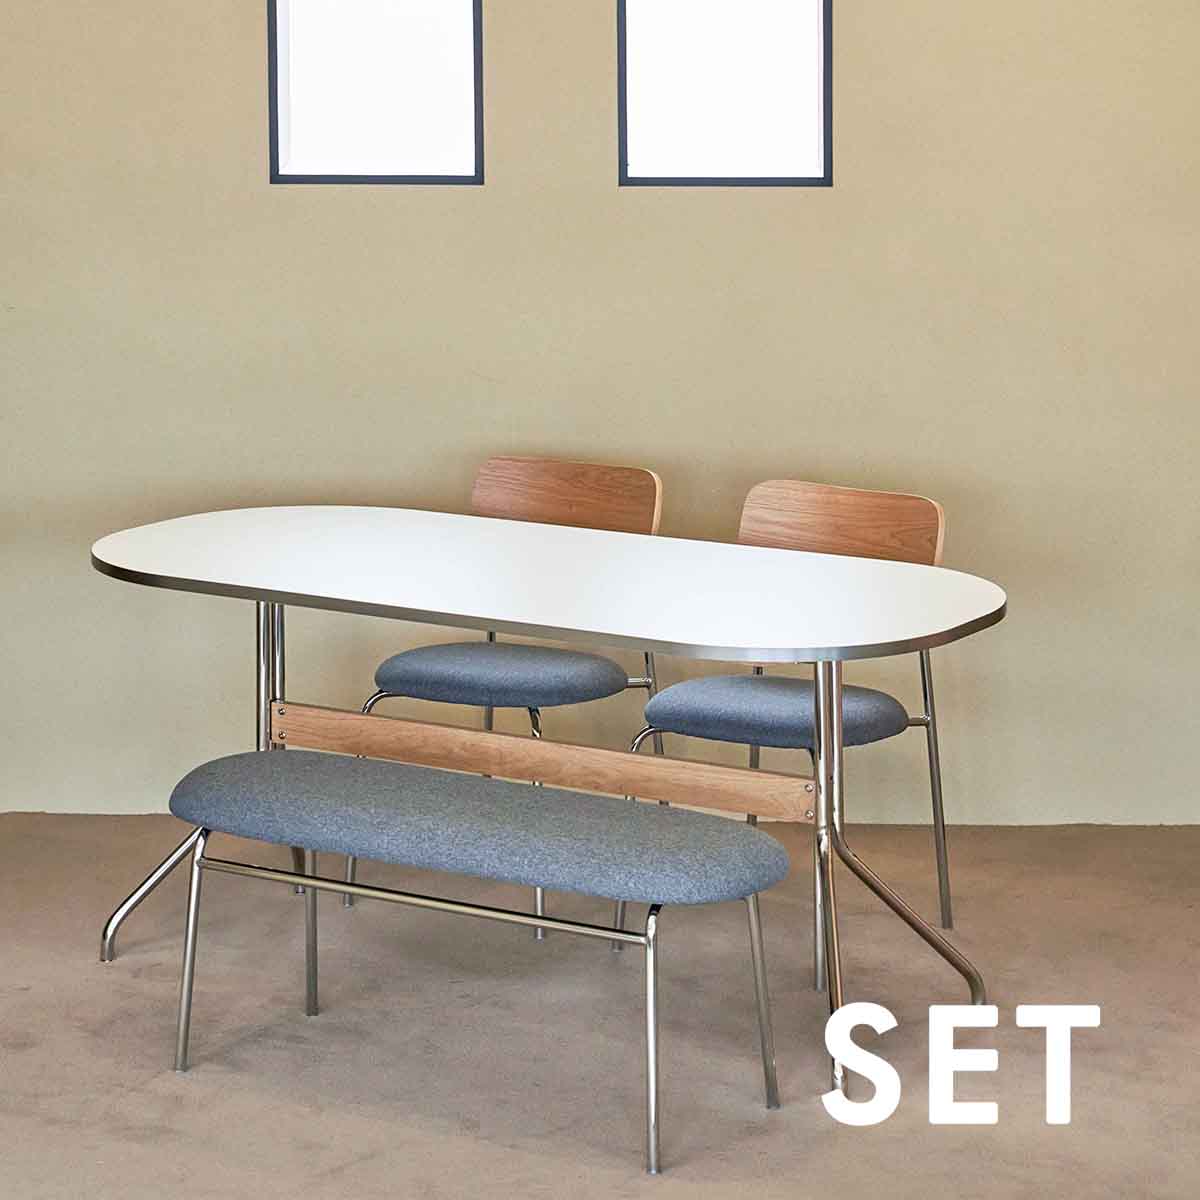 DELIGHT TABLE SET  [1700]